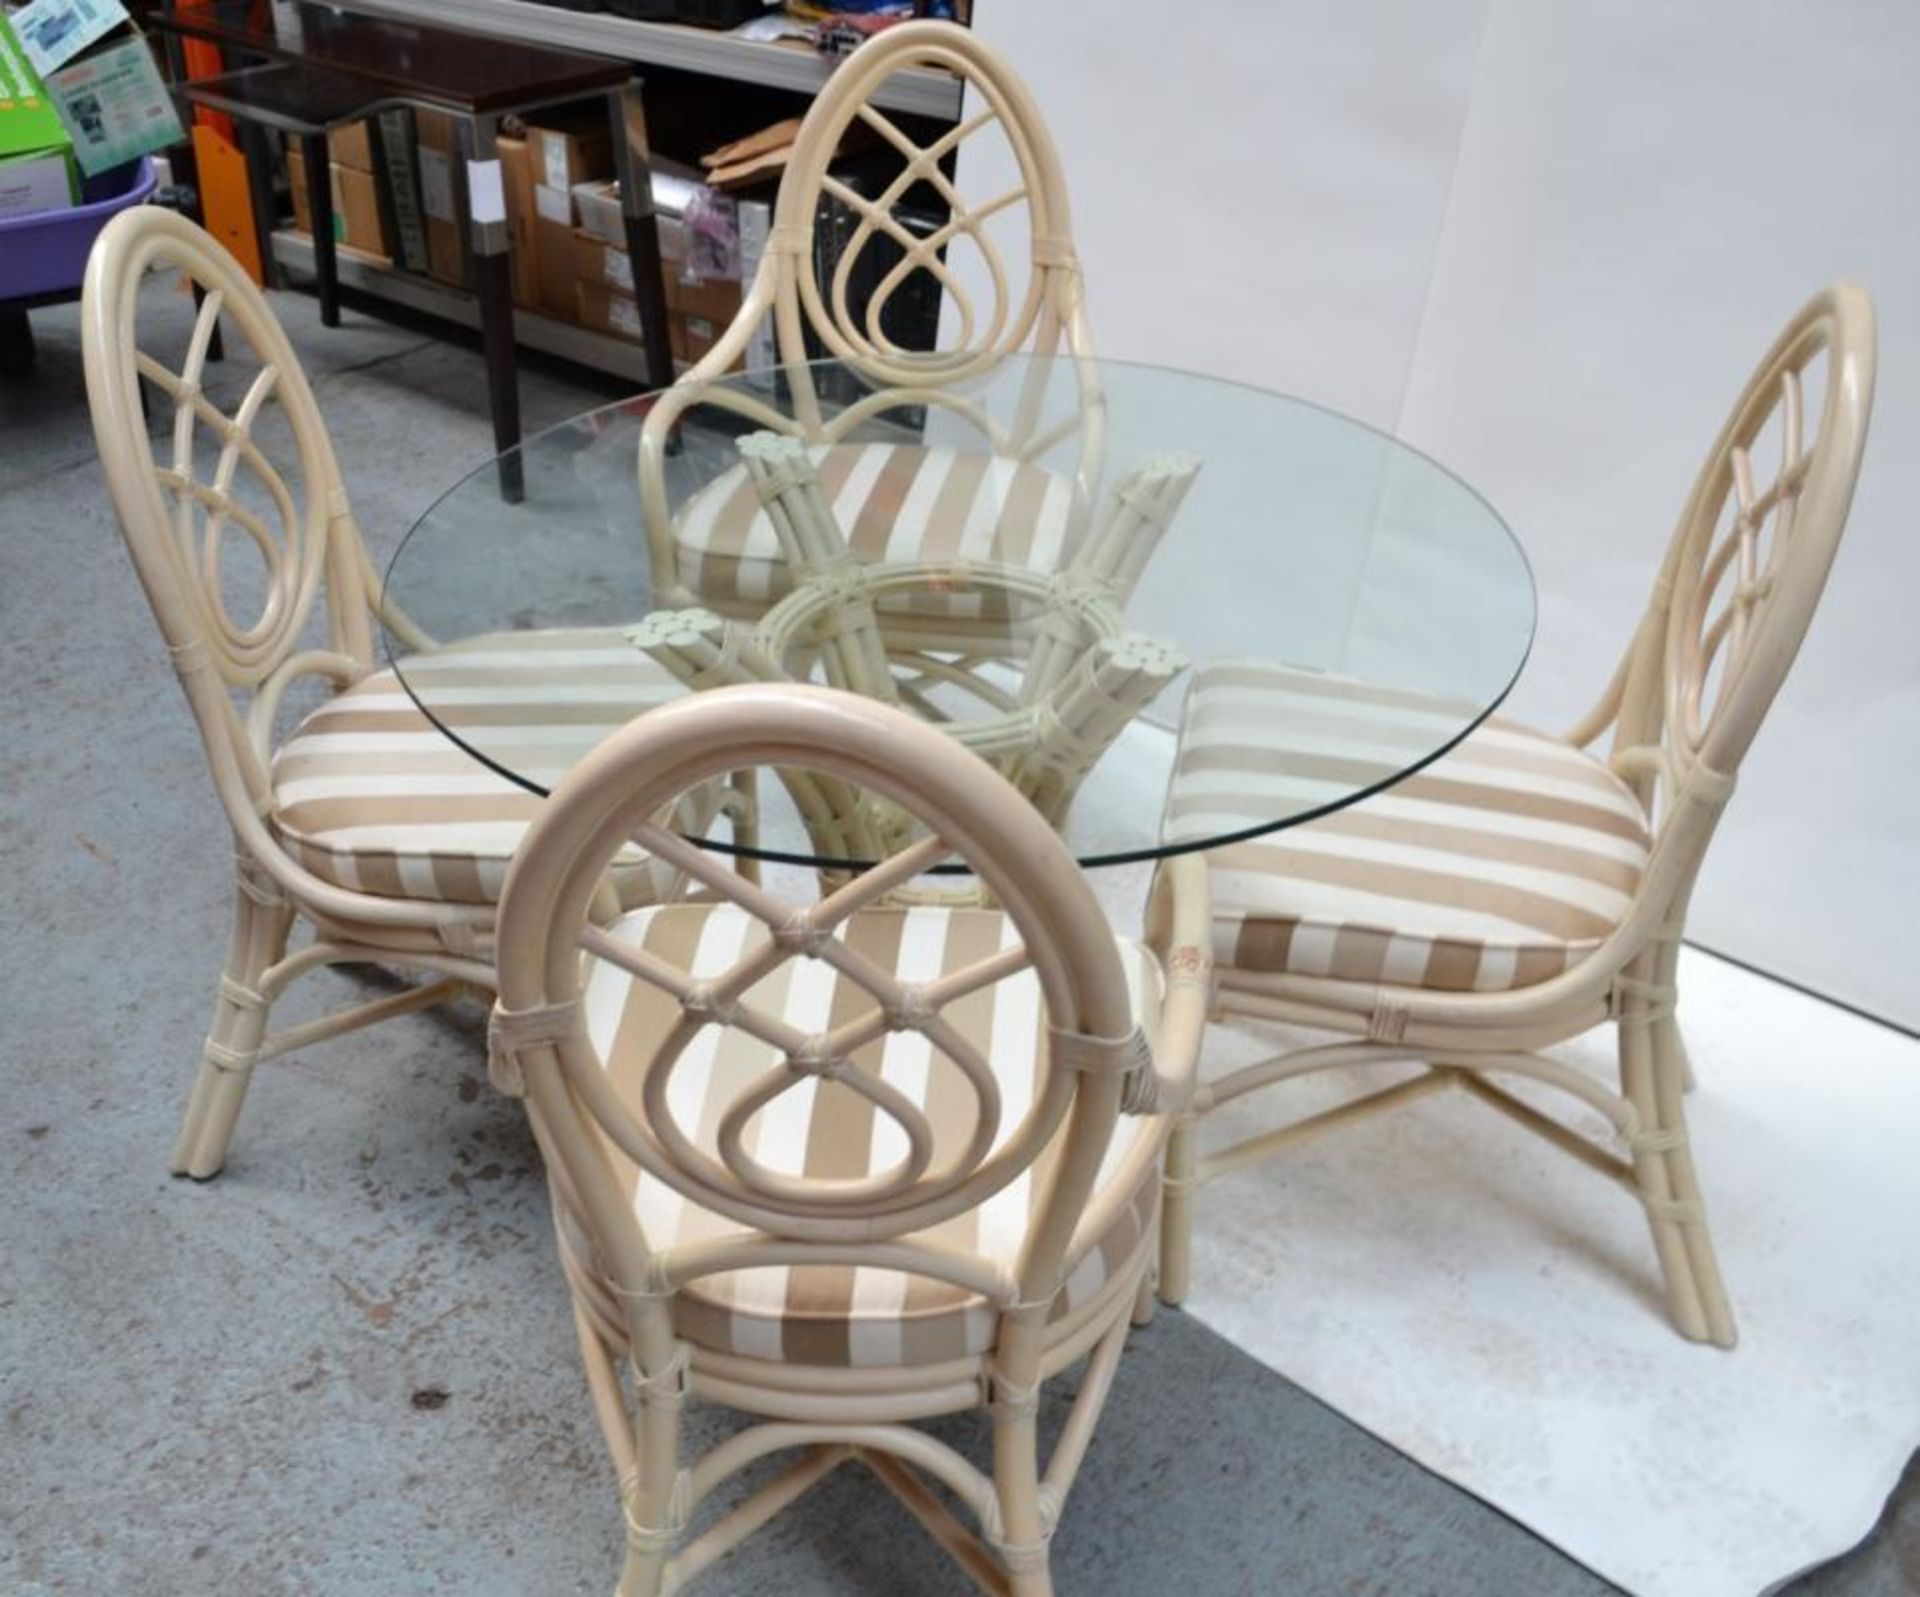 1 x Glass Topped Cane Table with 4 Chairs - Pre-owned In Good Condition - AE010 - CL007 - - Image 5 of 13